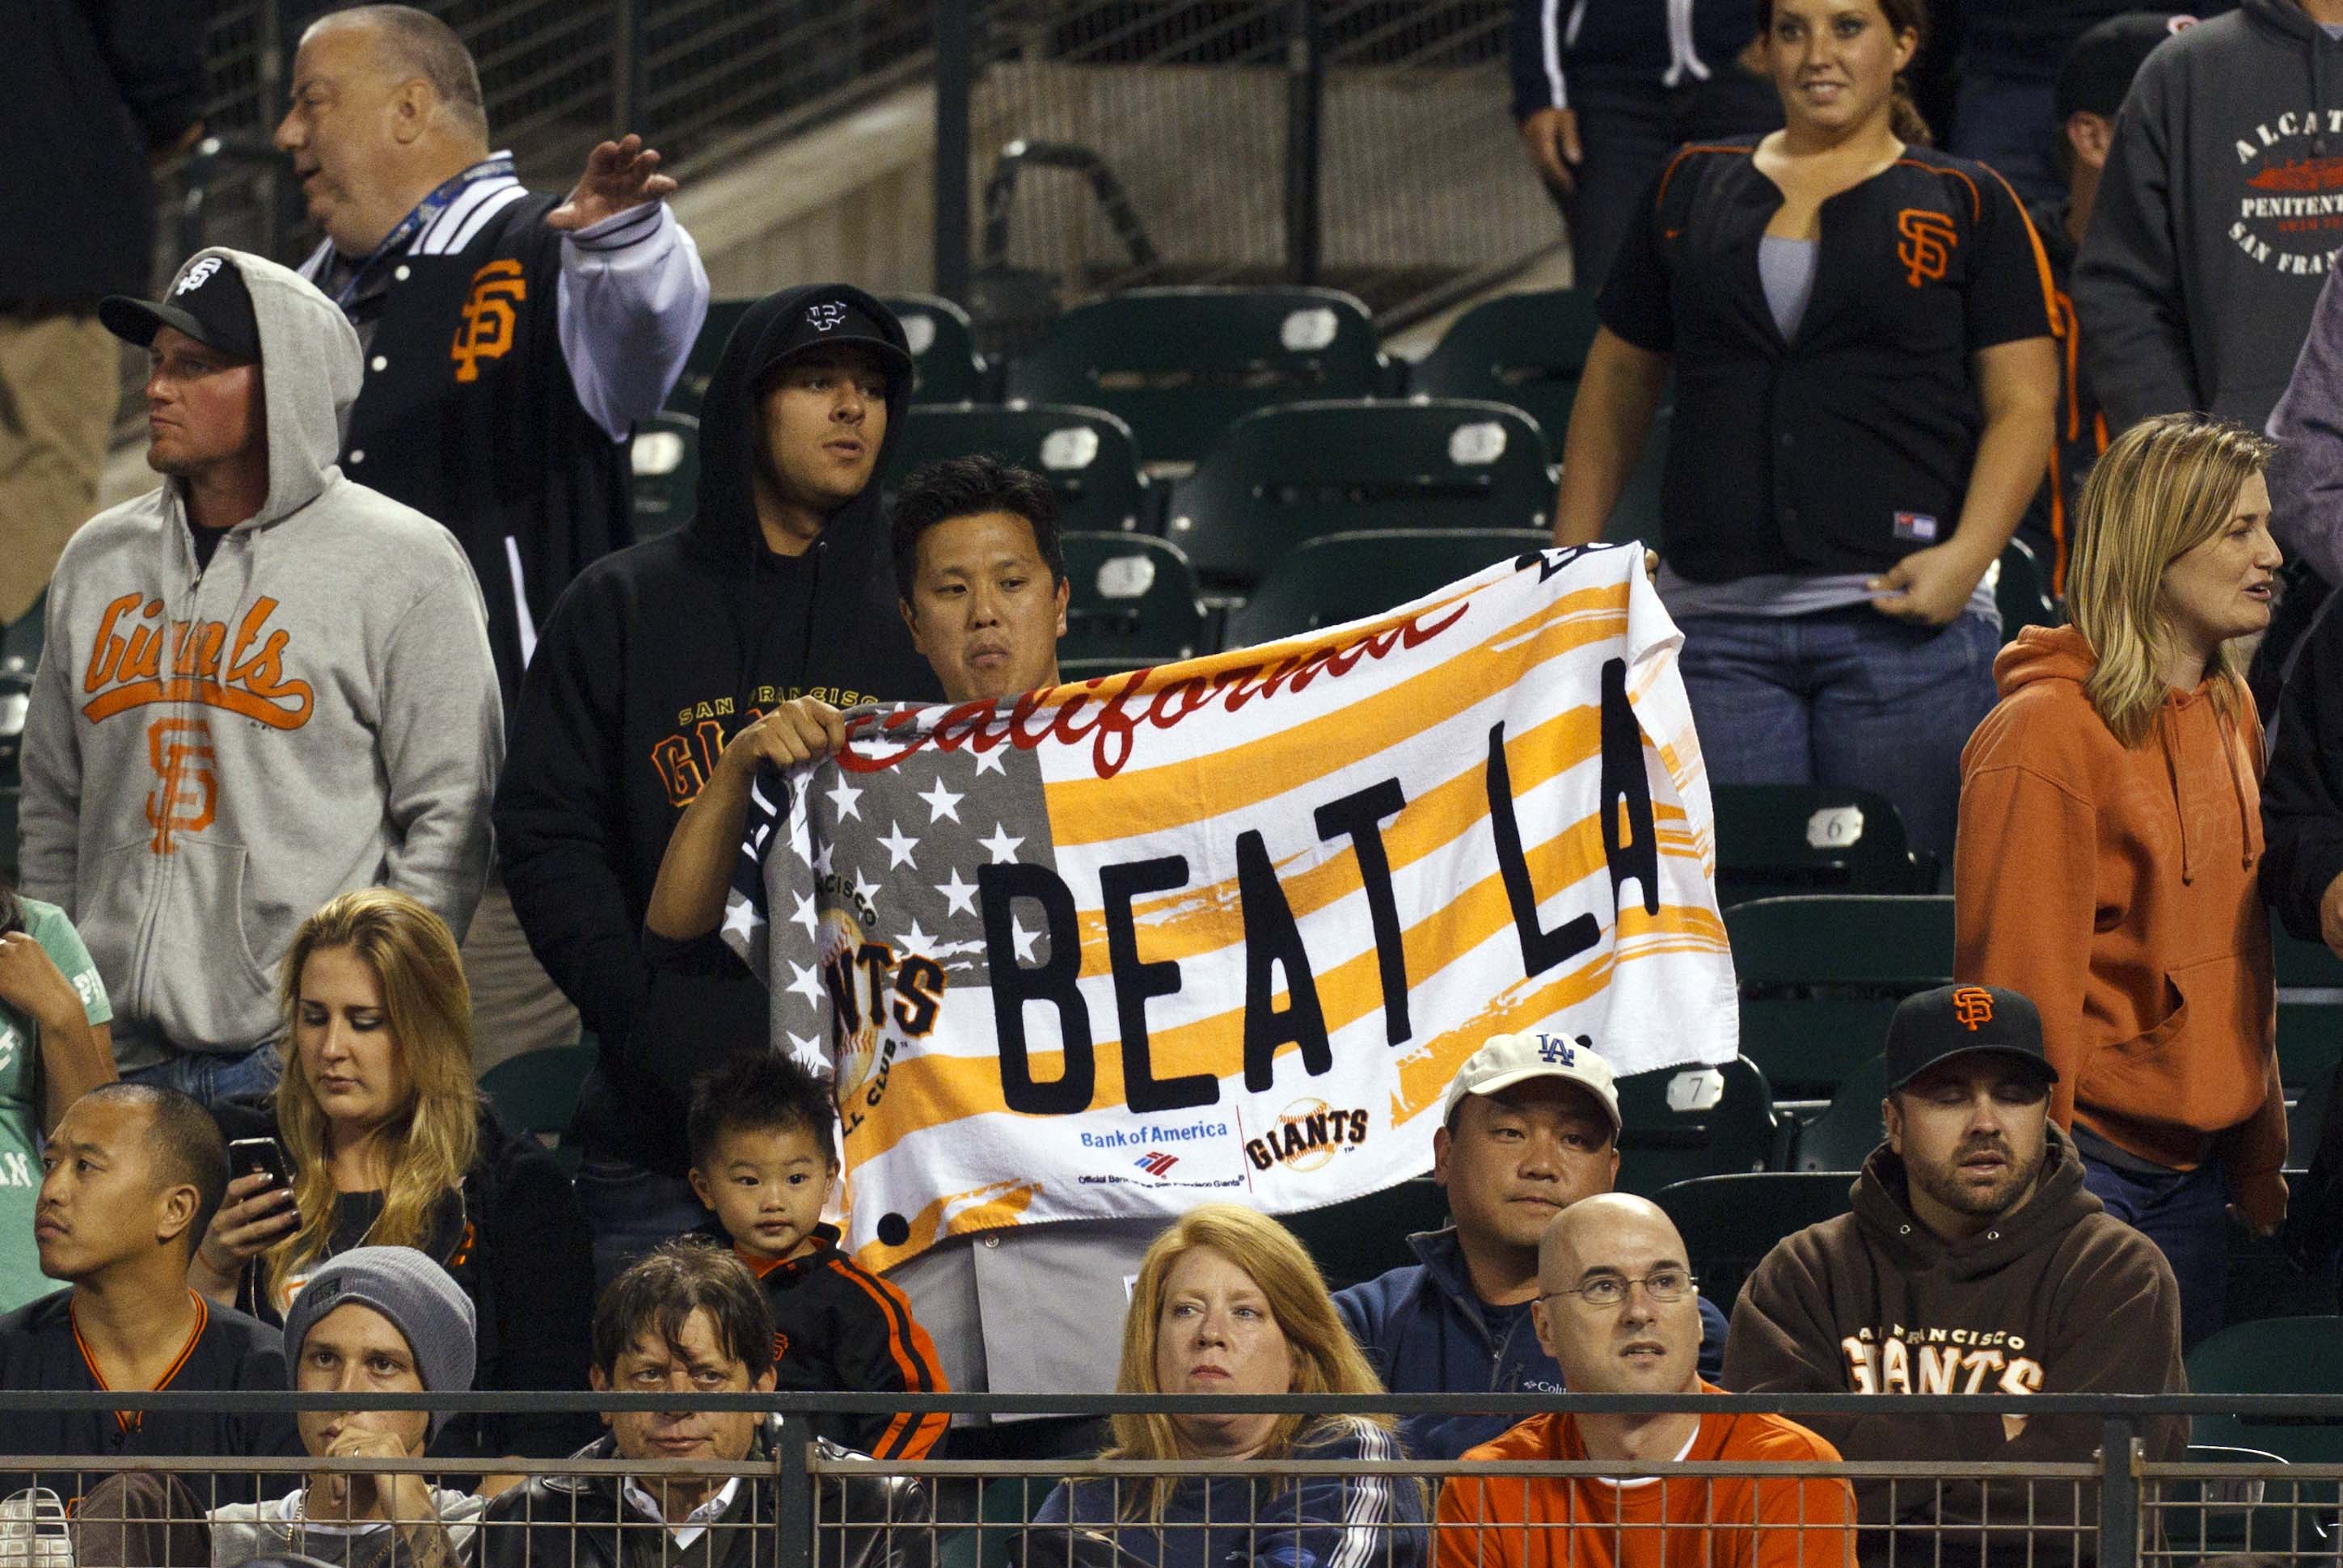 Opinion: San Francisco Giants fans leave their hearts high on a